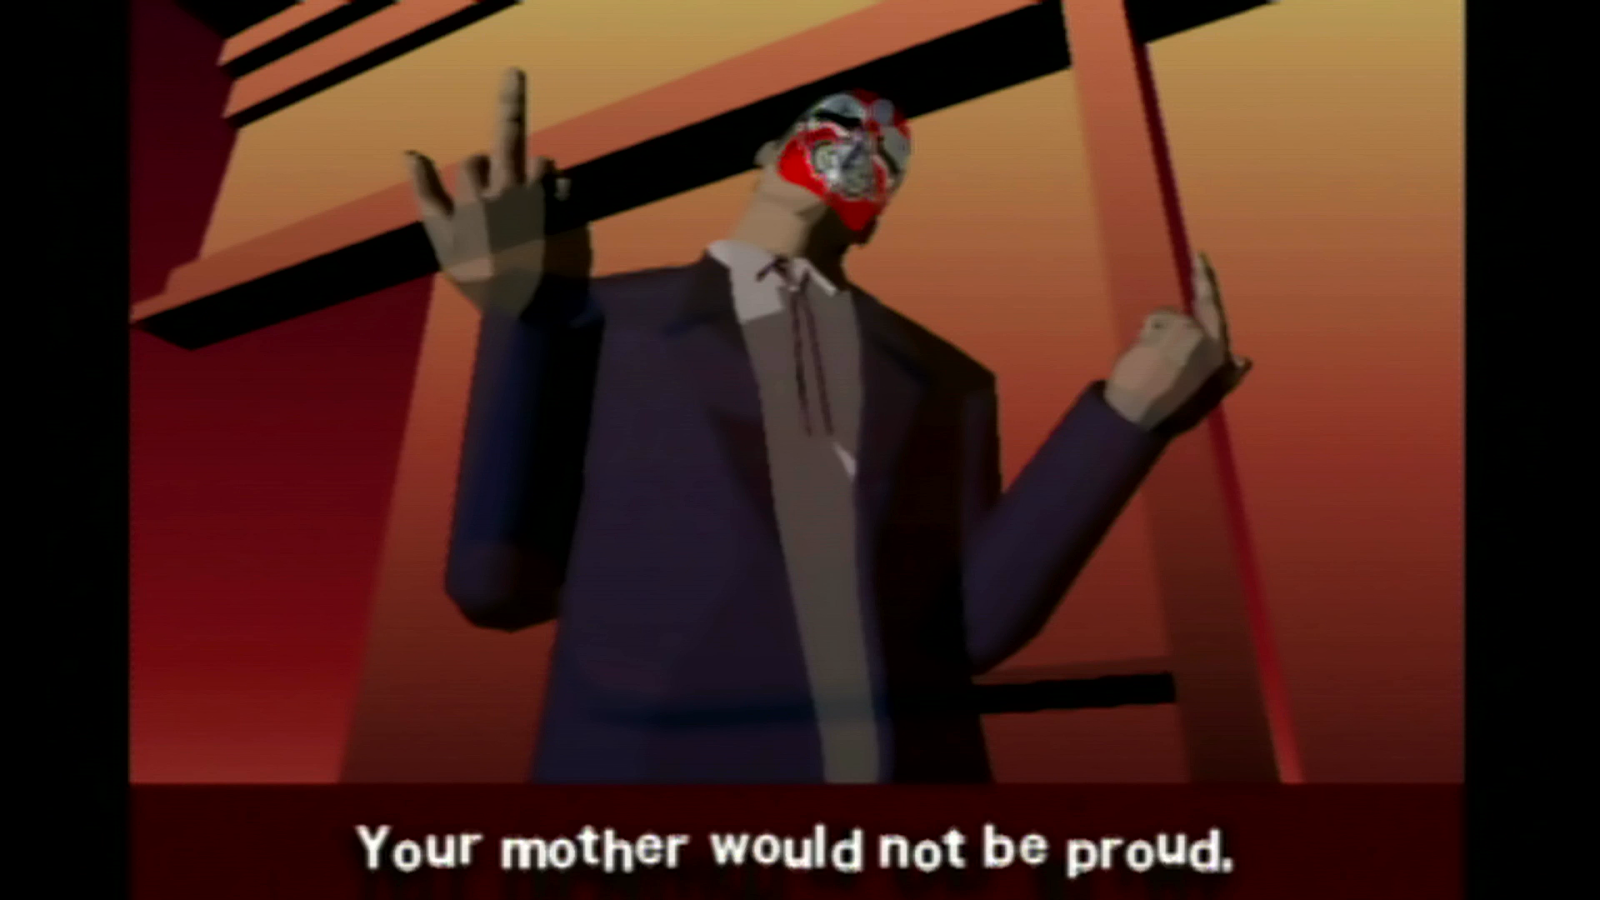 Killer 7 is now 10 years old